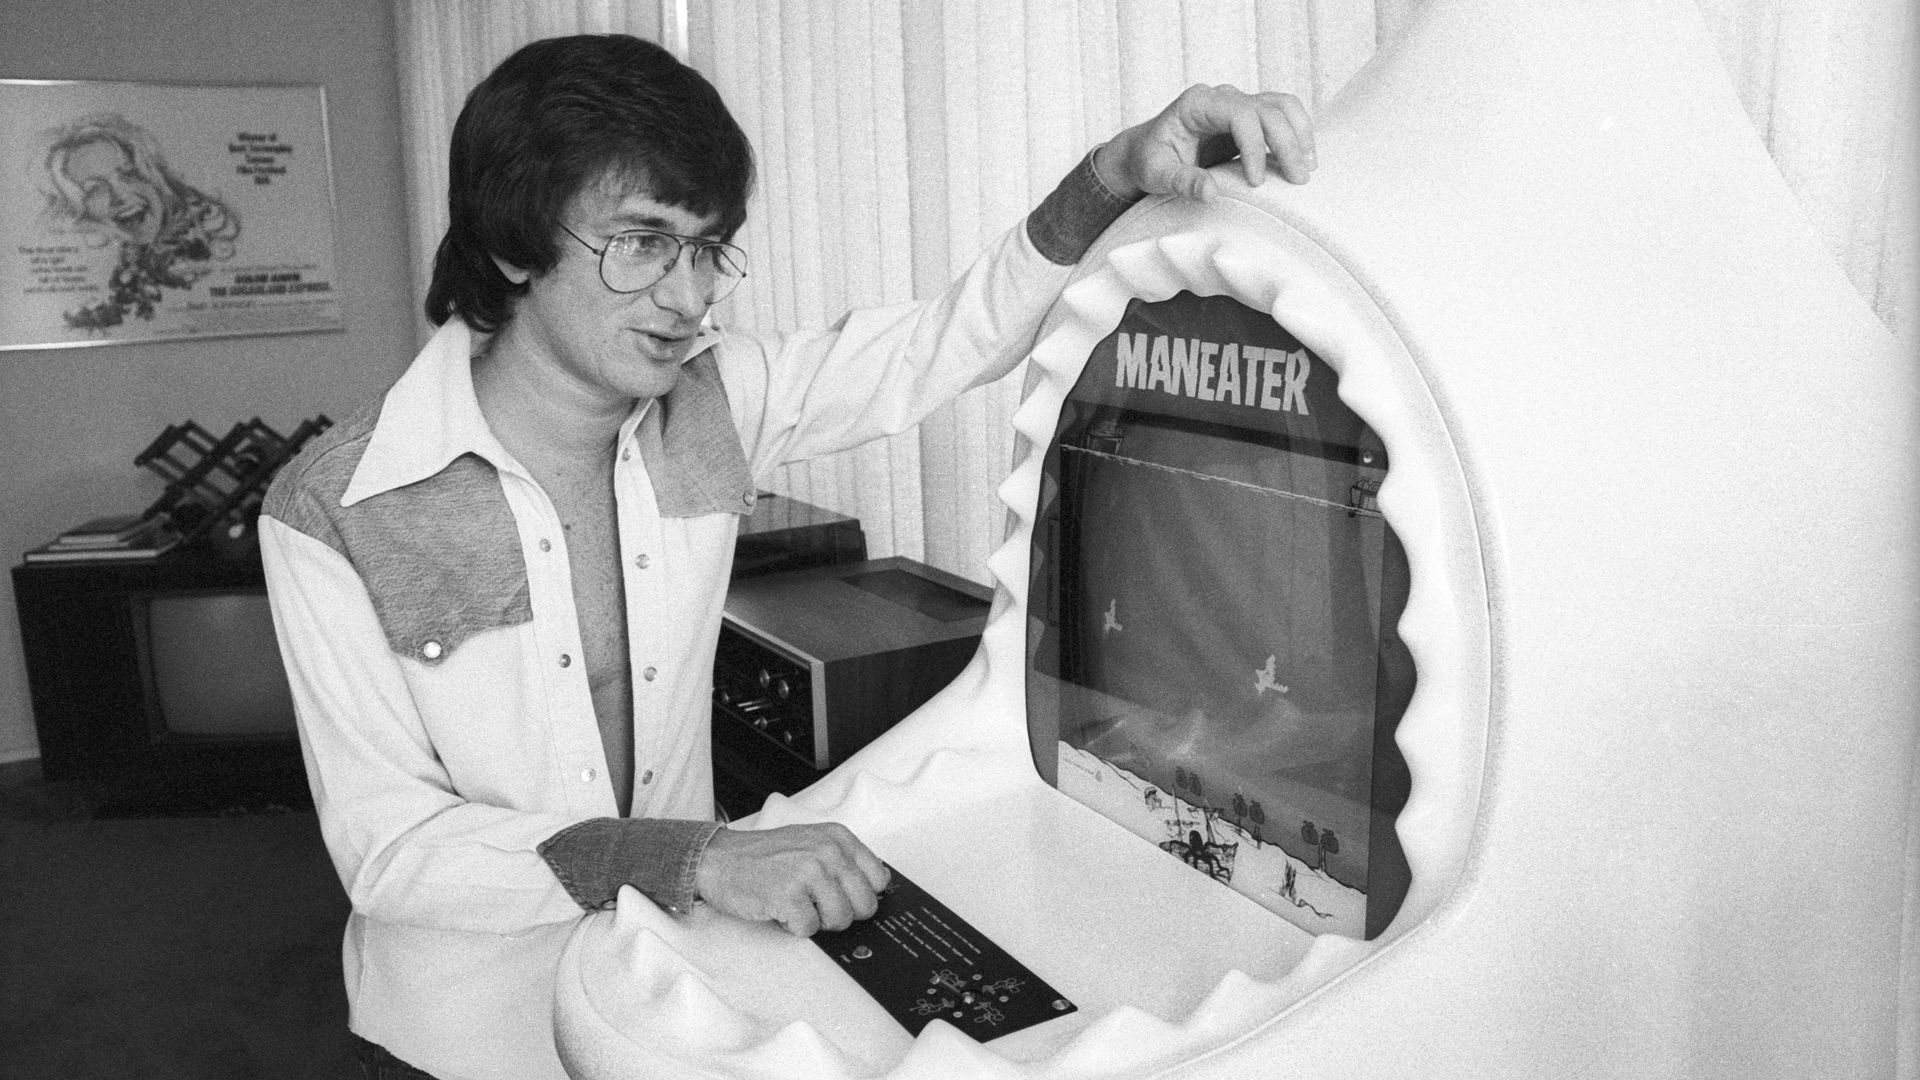 Black and white photo from the 1970s of a man standing next to an arcade game cabinet that is shaped like a shark with its jaws open